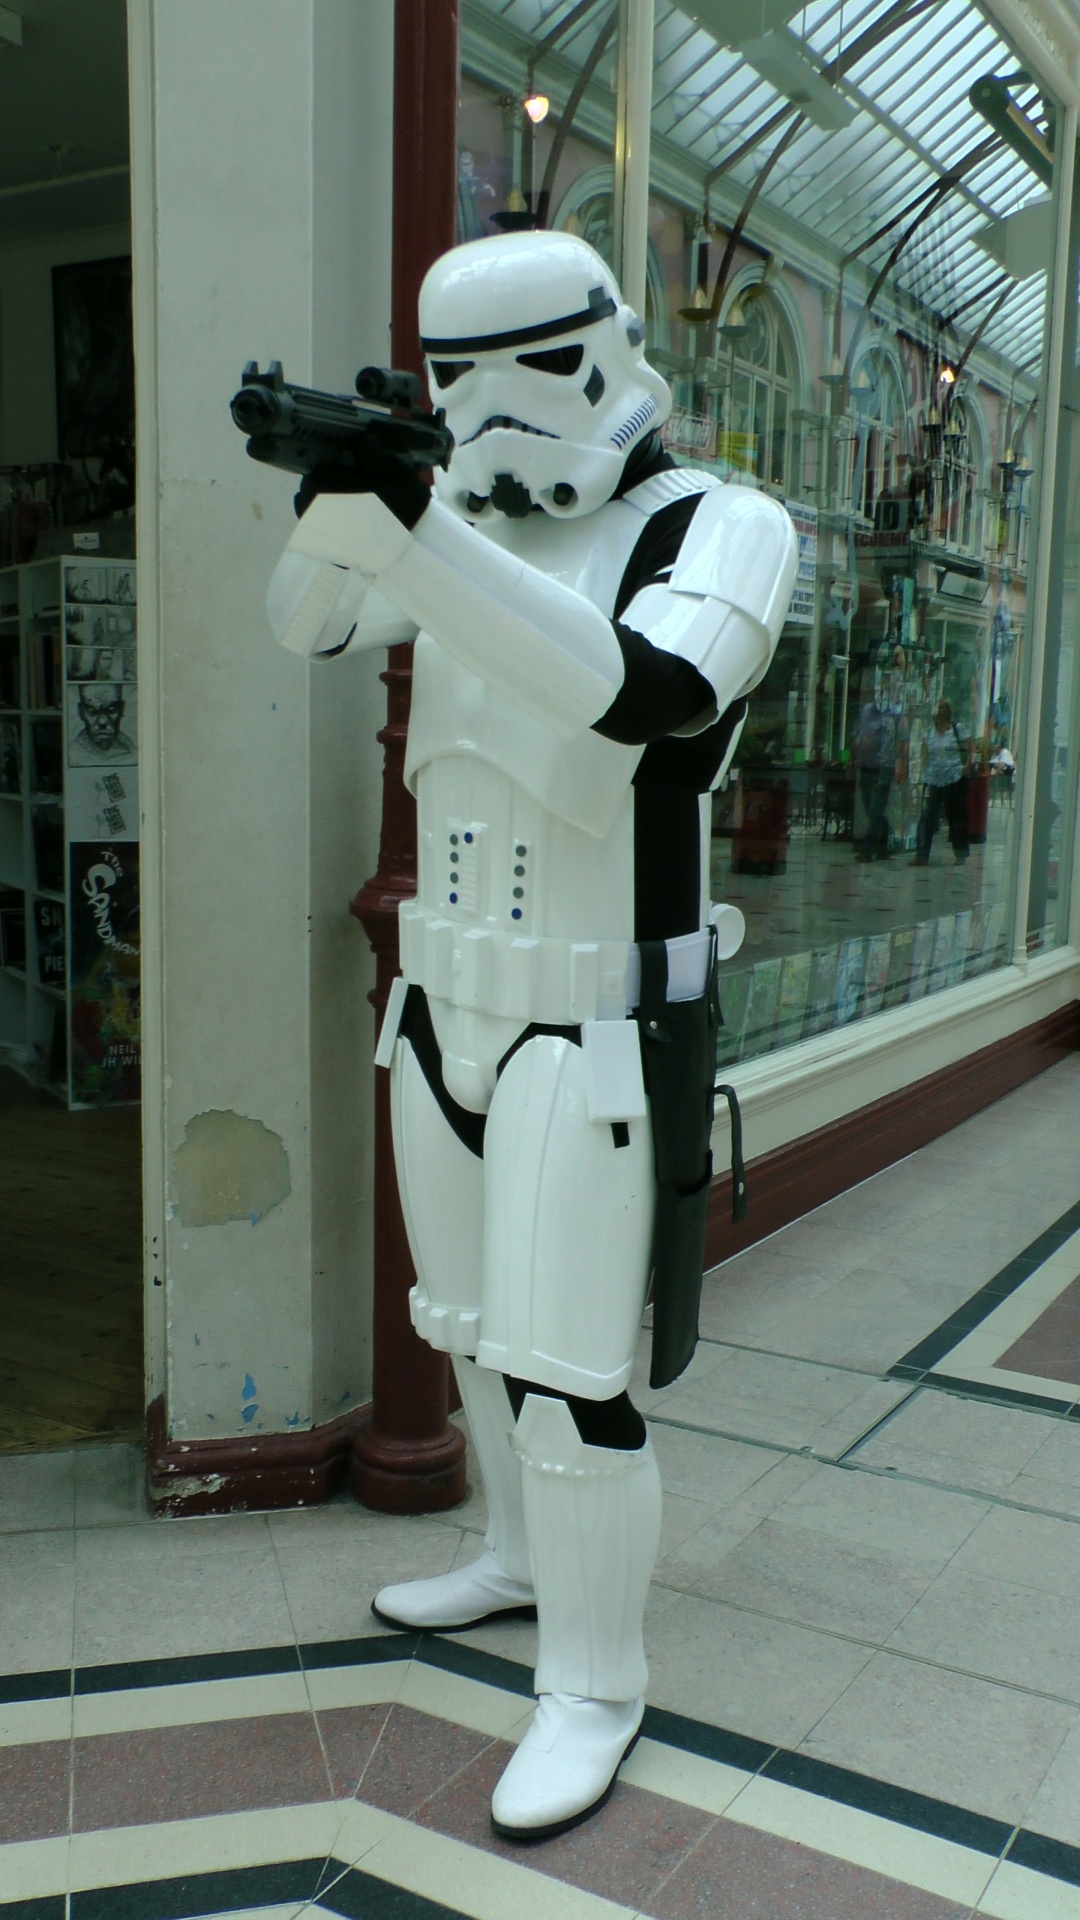 Star Wars Storm Trooper In Outfit At The Mall